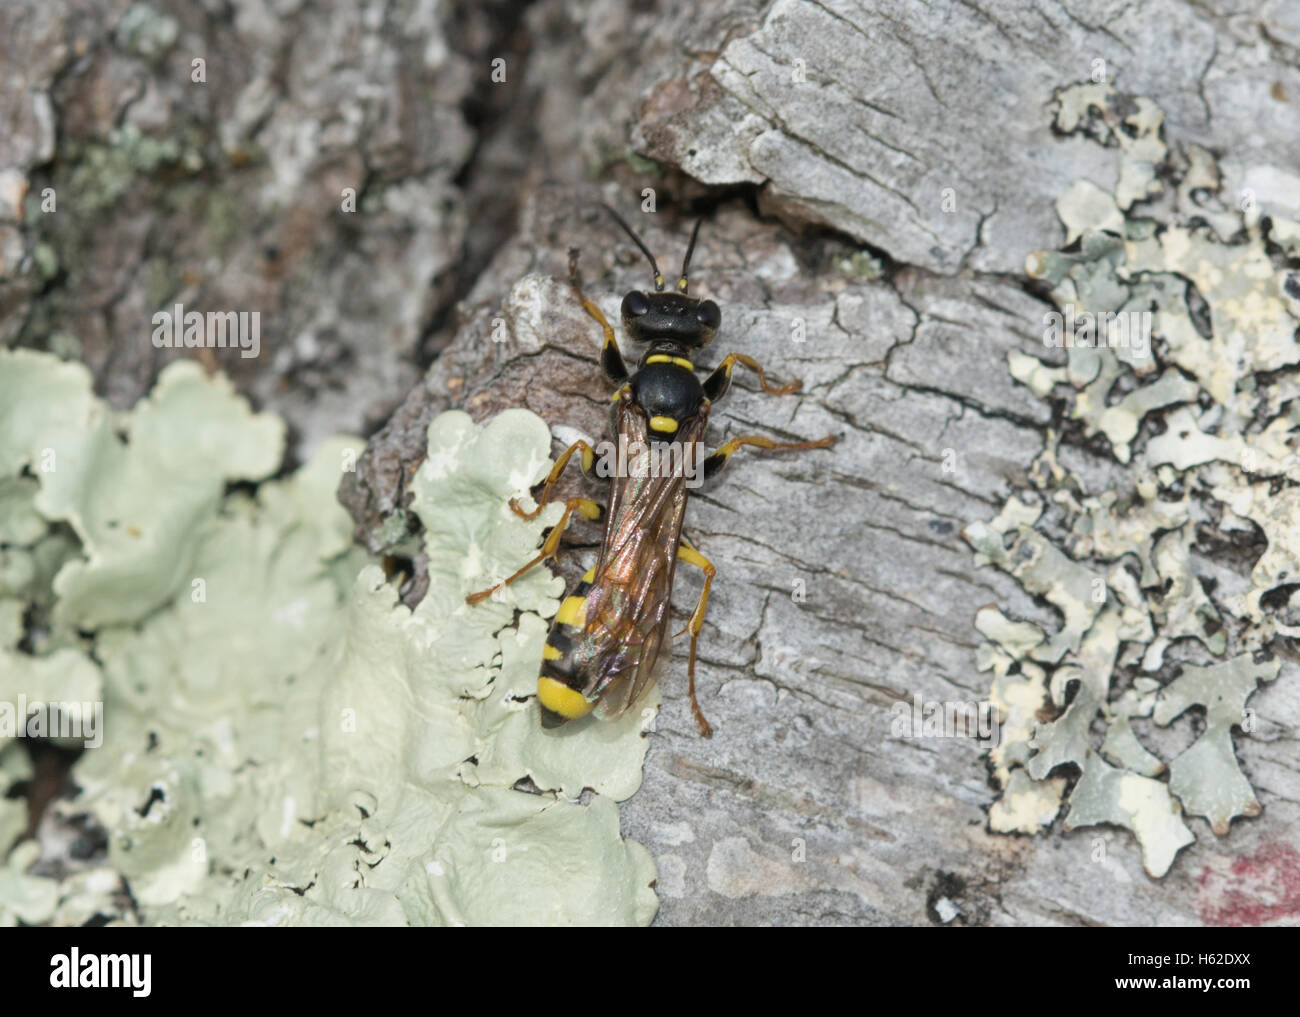 Field digger wasp (Mellinus arvensis) on lichen-covered tree in Surrey, England Stock Photo